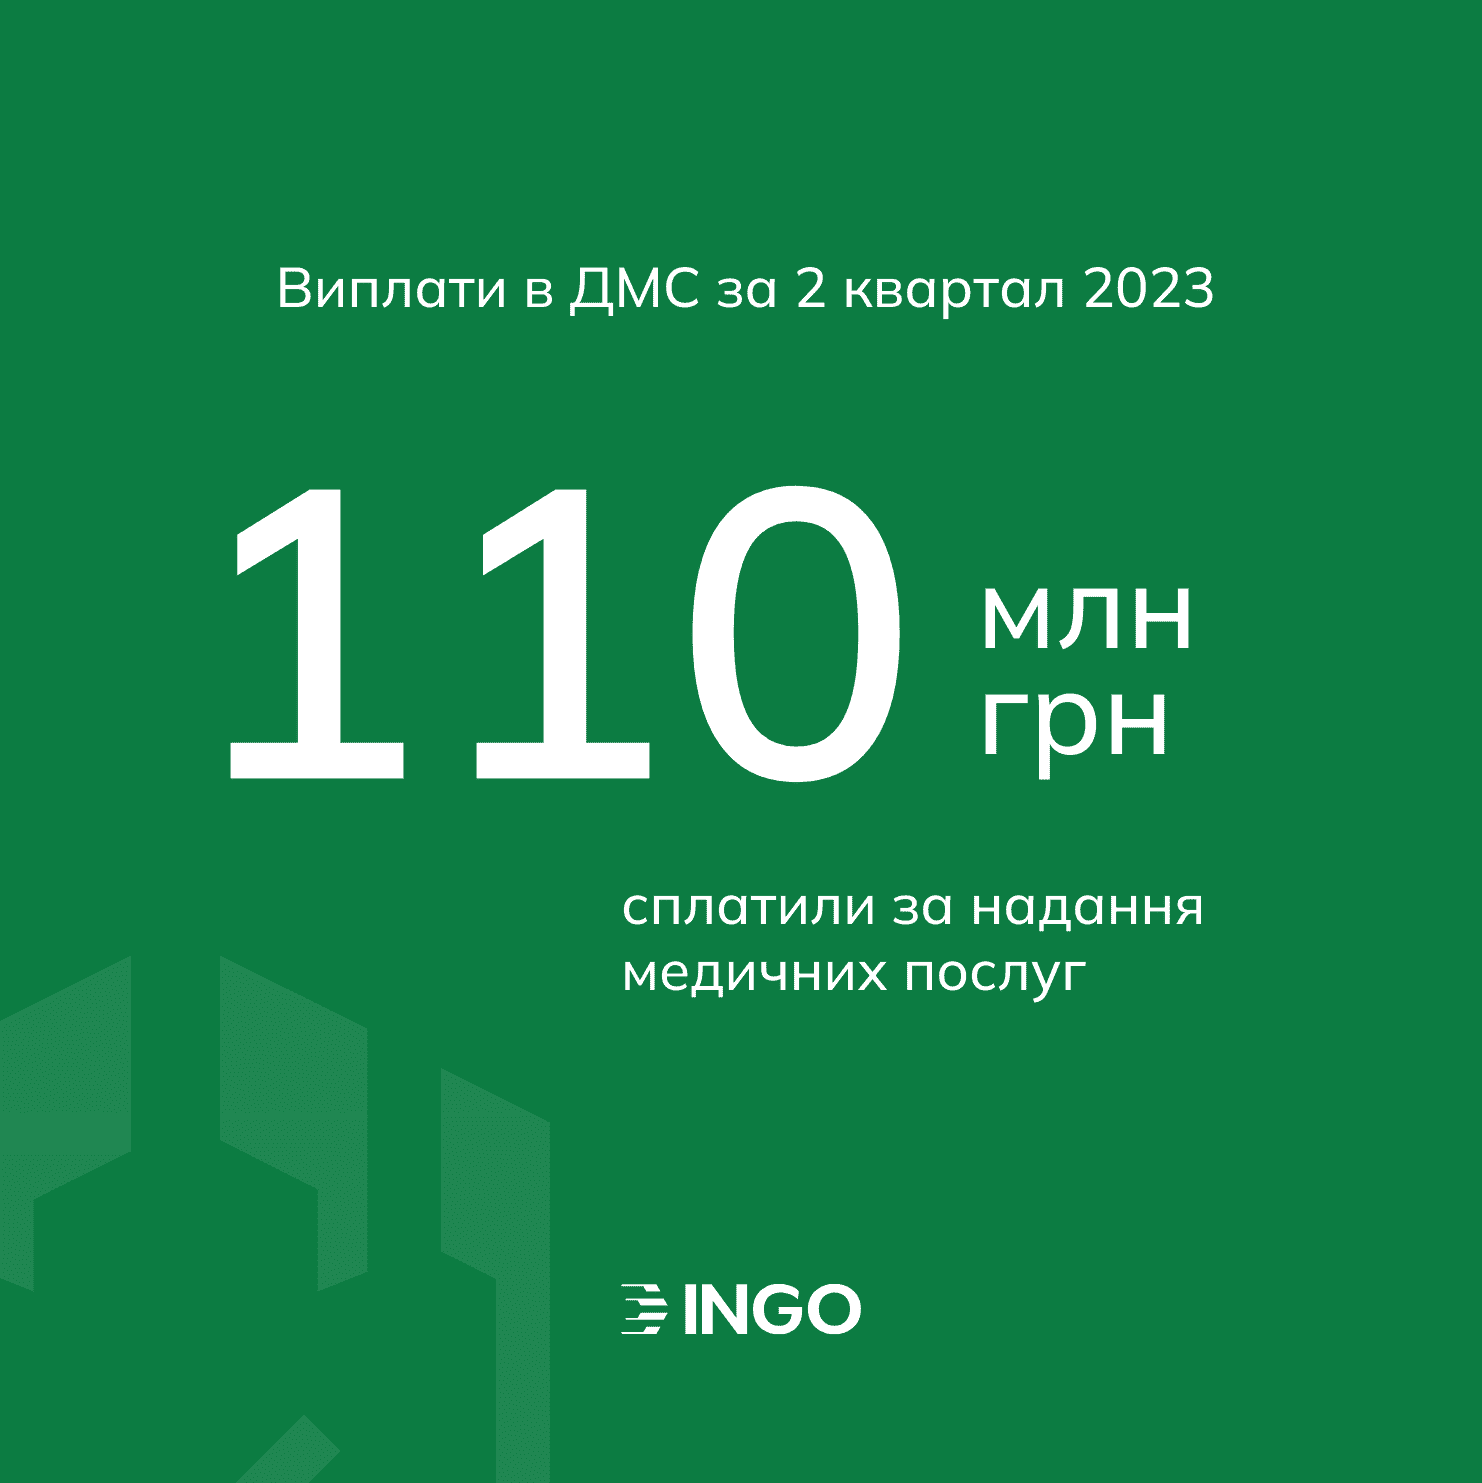 «INGO» Insurance Company Paid UAH 110 million for Provision of Medical Services to Its Clients in the 2nd Quarter of 2023